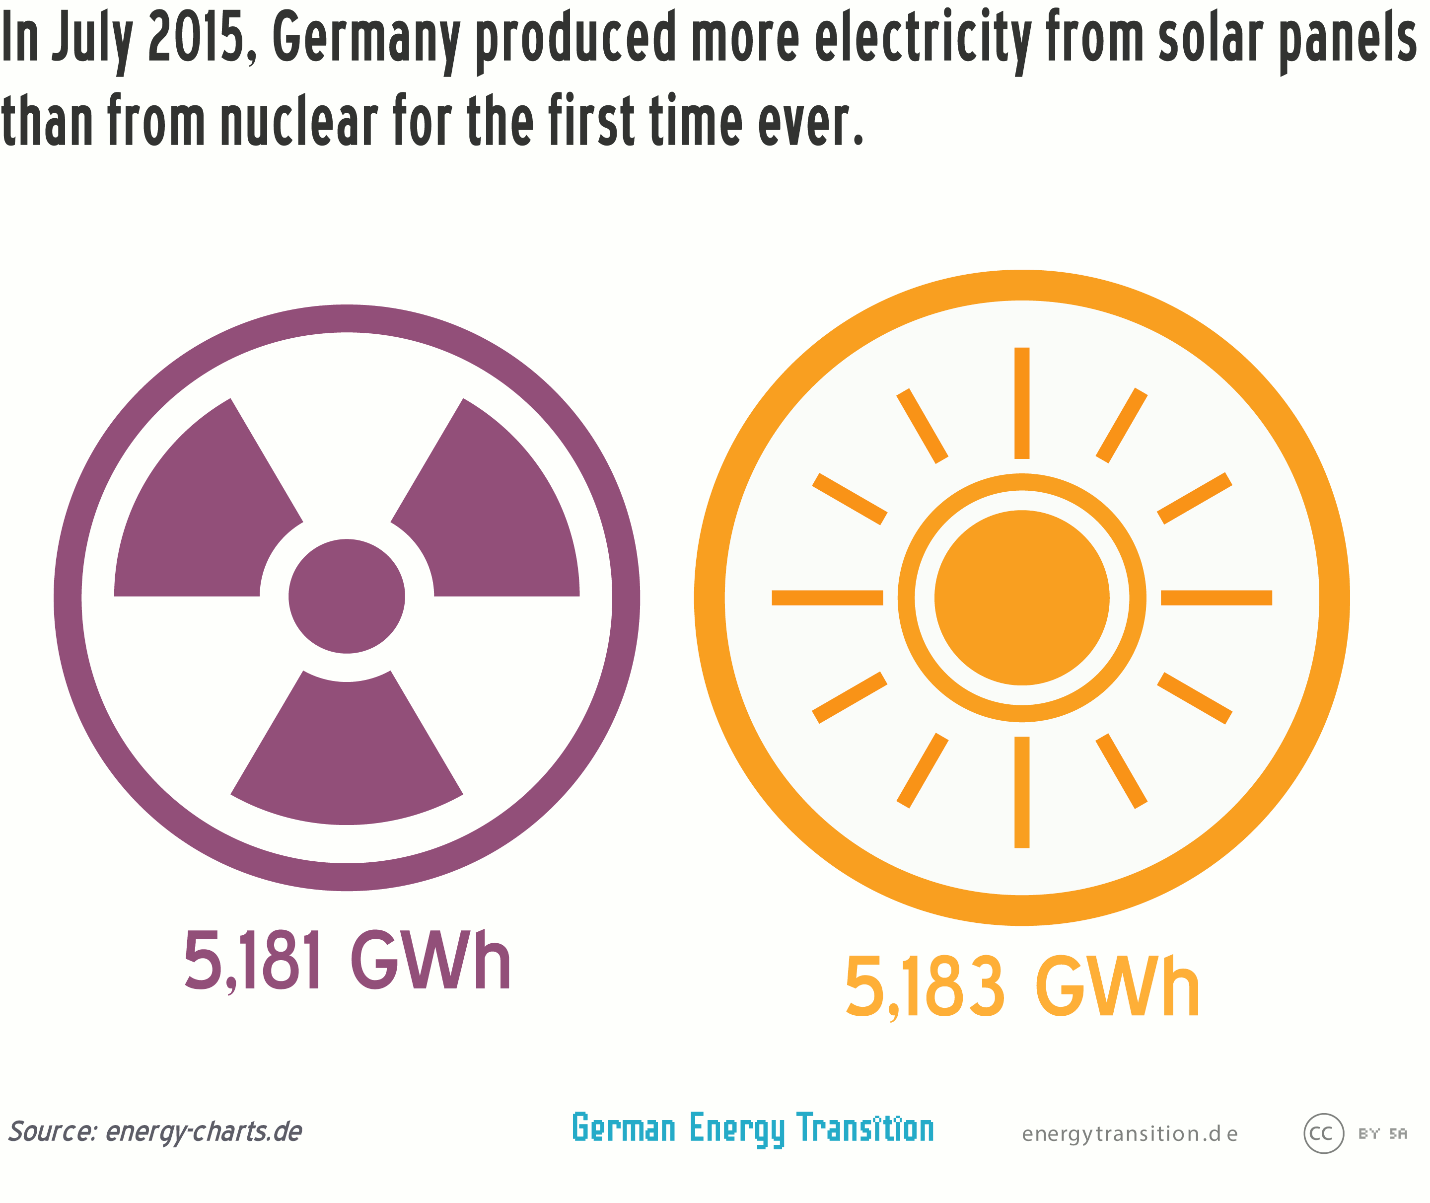 In July 2015, Germany produced more electricity from solar panels than from nuclear